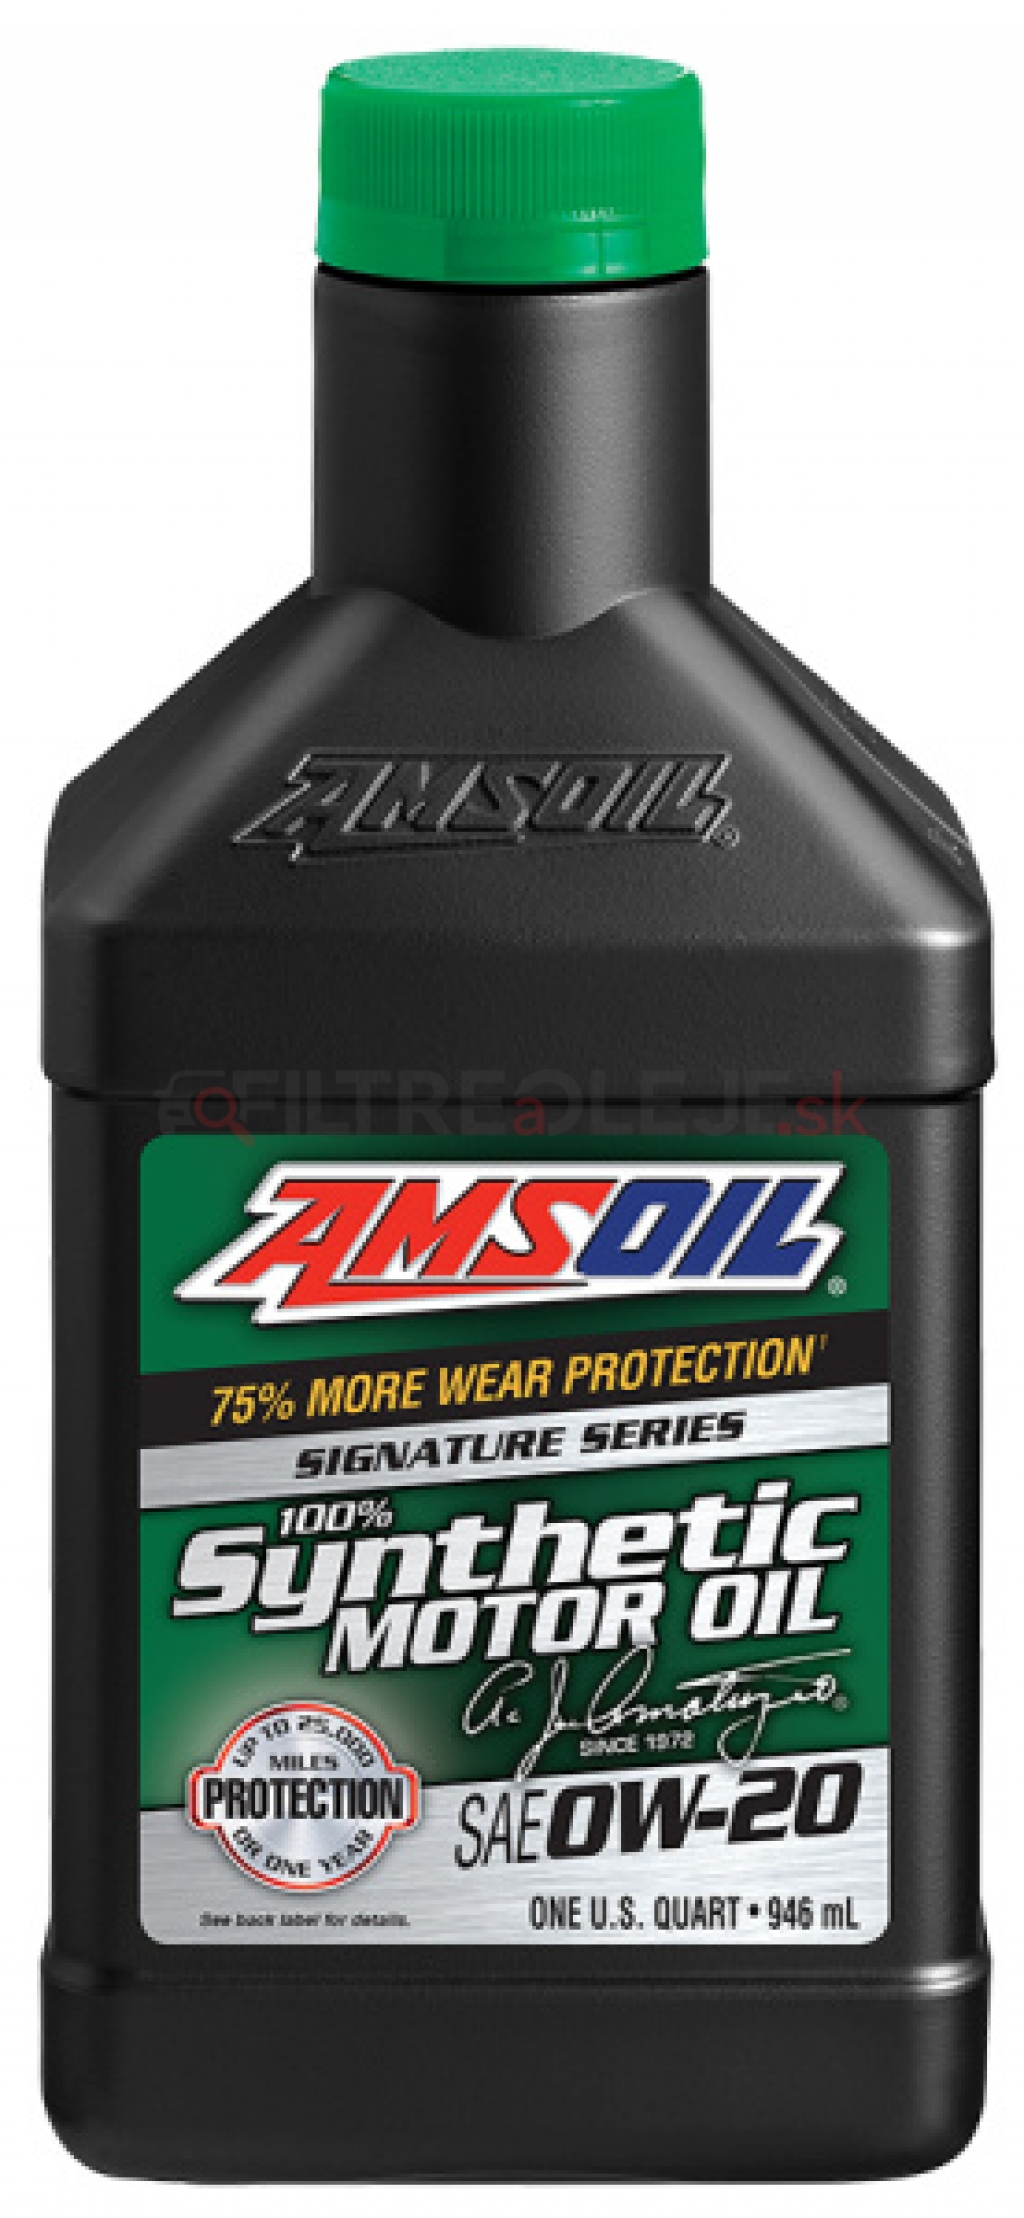 AMSOIL 0w20. Моторное масло AMSOIL asm1g. AMSOIL Dot 3. Масло МГП-10. Amsoil signature series synthetic